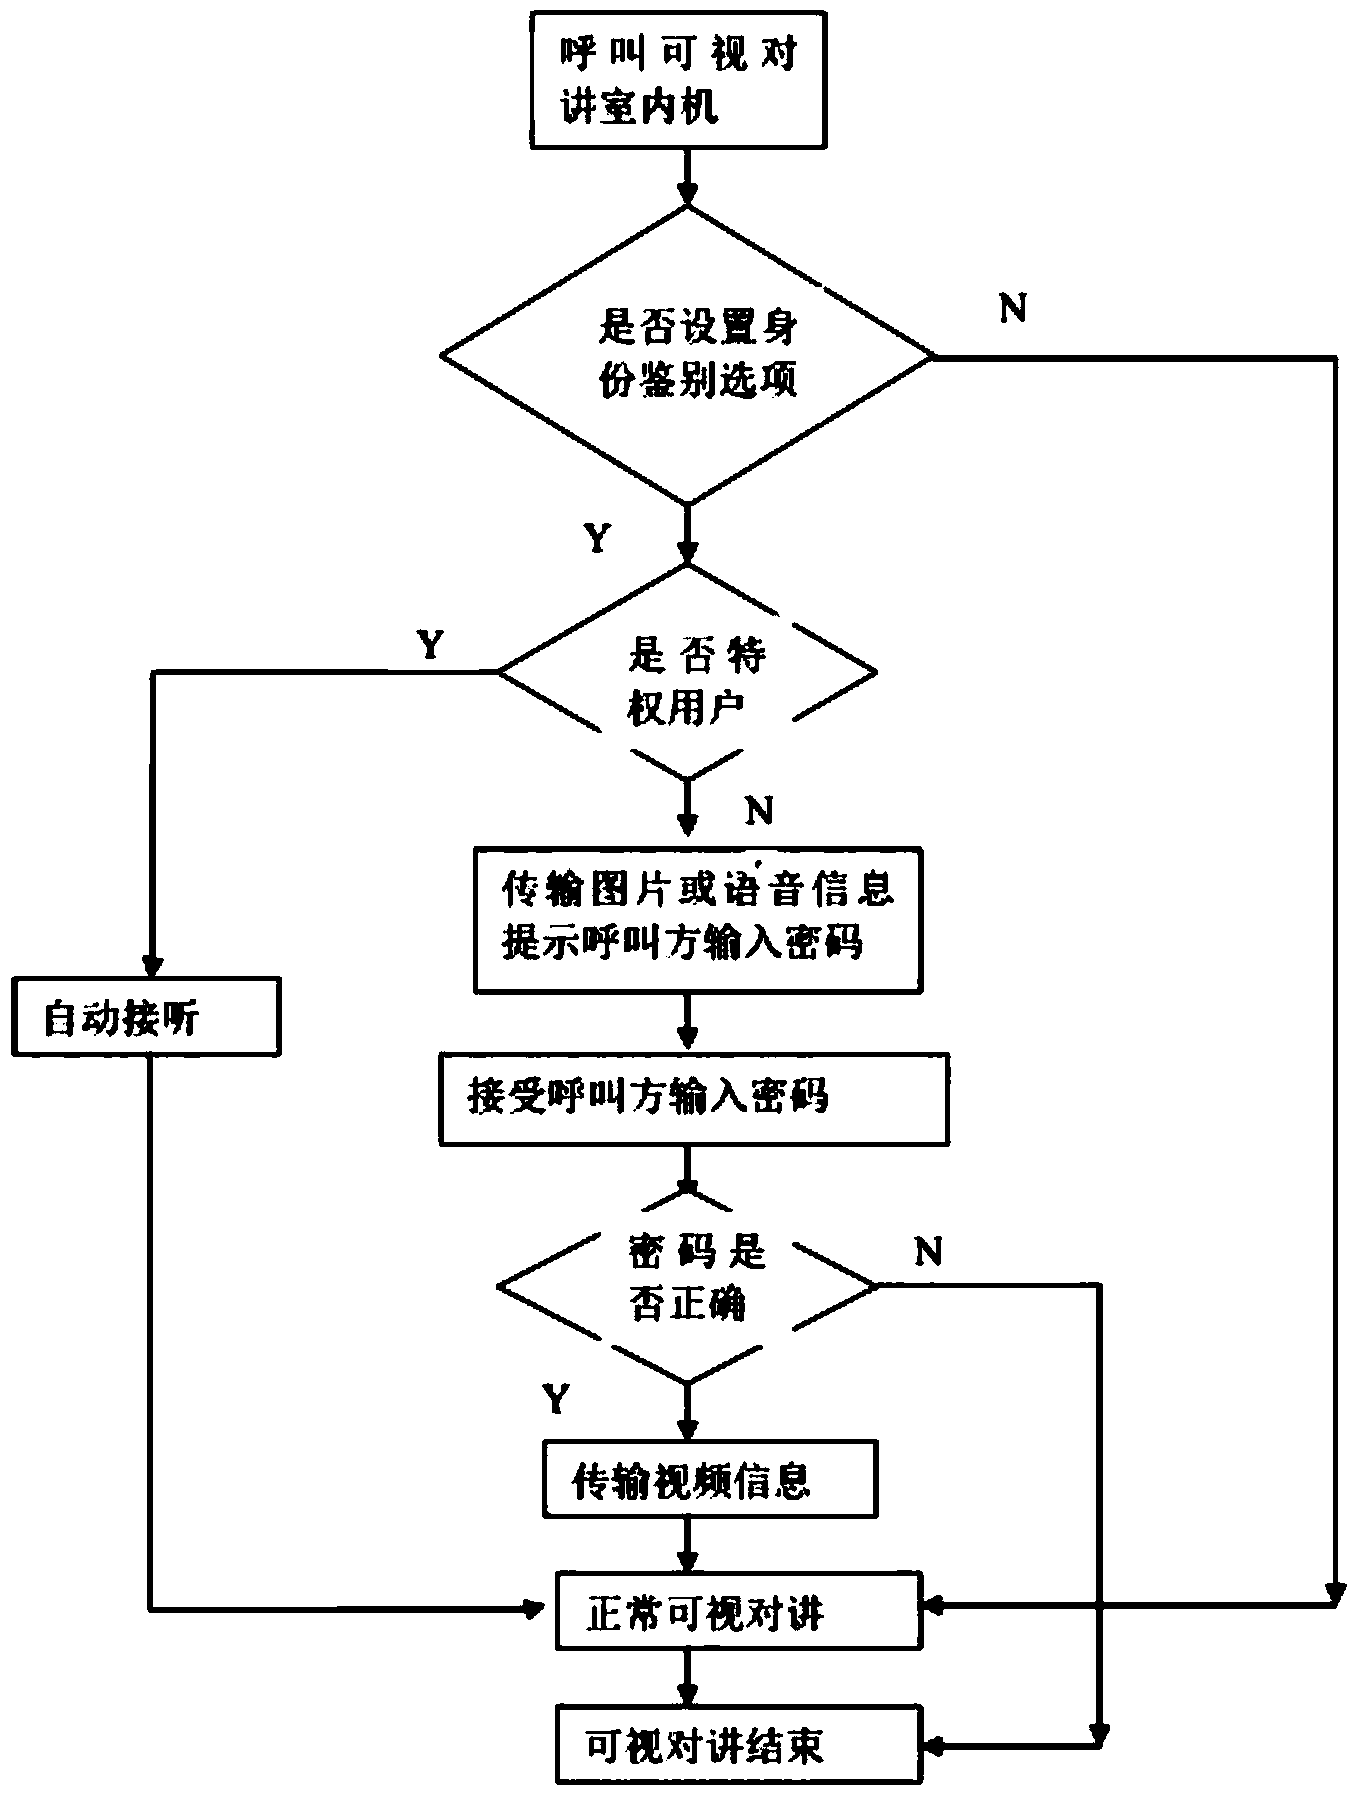 Identity authentication and judgment method of network building visual intercom